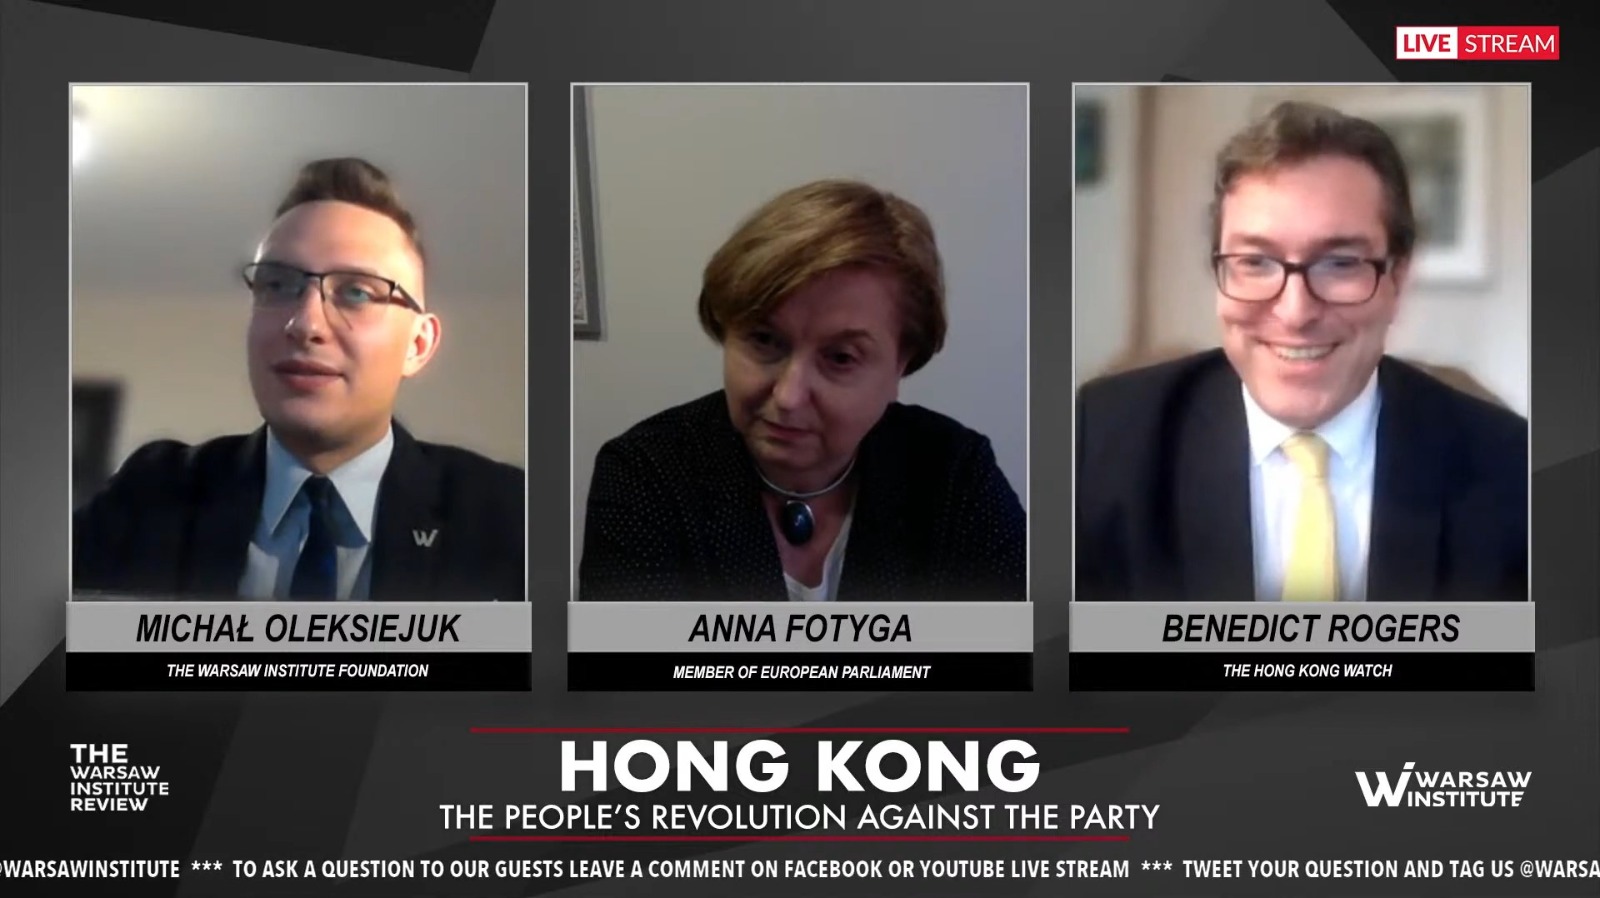 Summary: Hong Kong – the people’s revolution against the Party